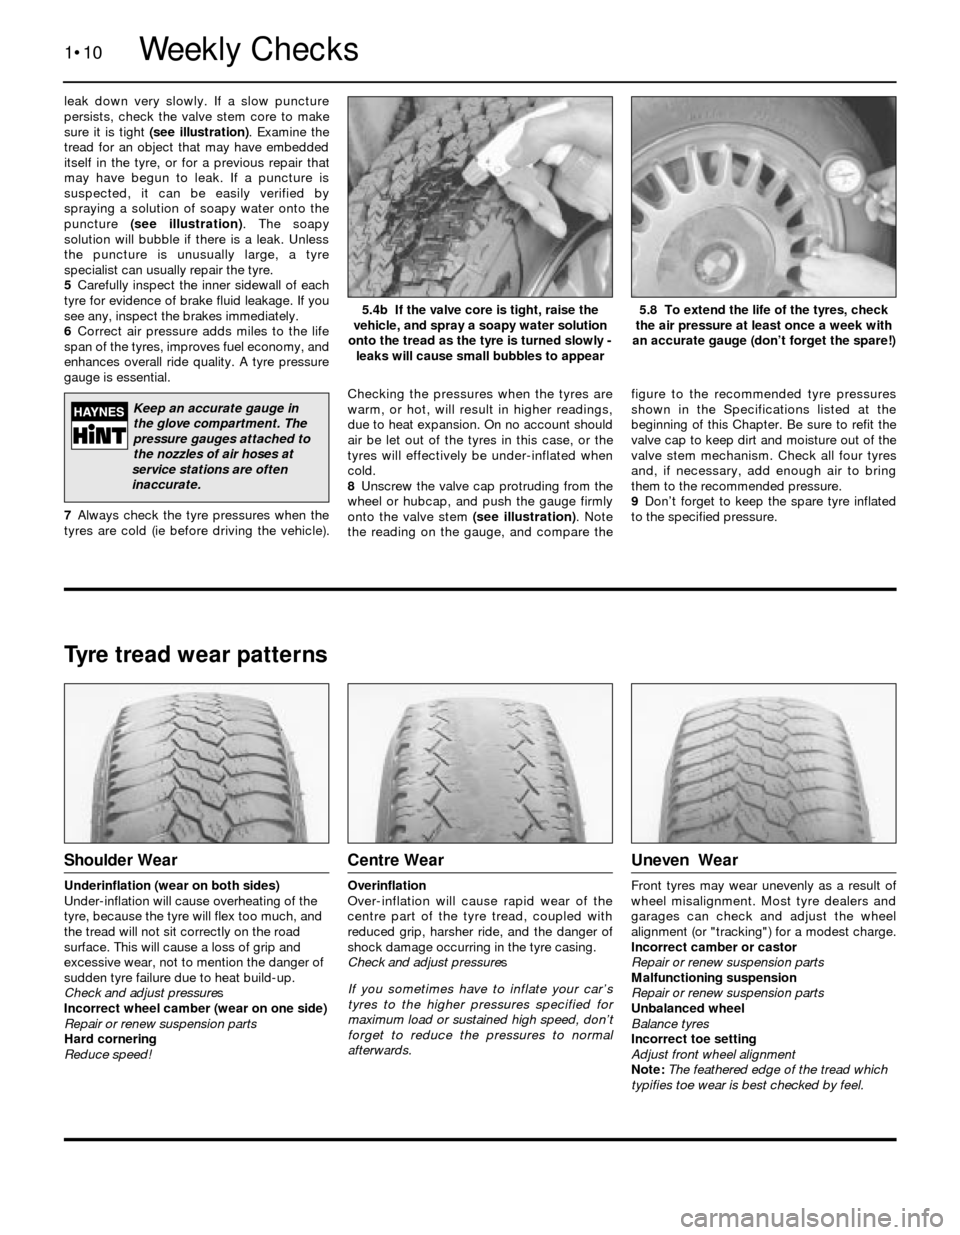 BMW 5 SERIES 1991 E34 Workshop Manual leak down very slowly. If a slow puncture
persists, check the valve stem core to make
sure it is tight (see illustration). Examine the
tread for an object that may have embedded
itself in the tyre, or